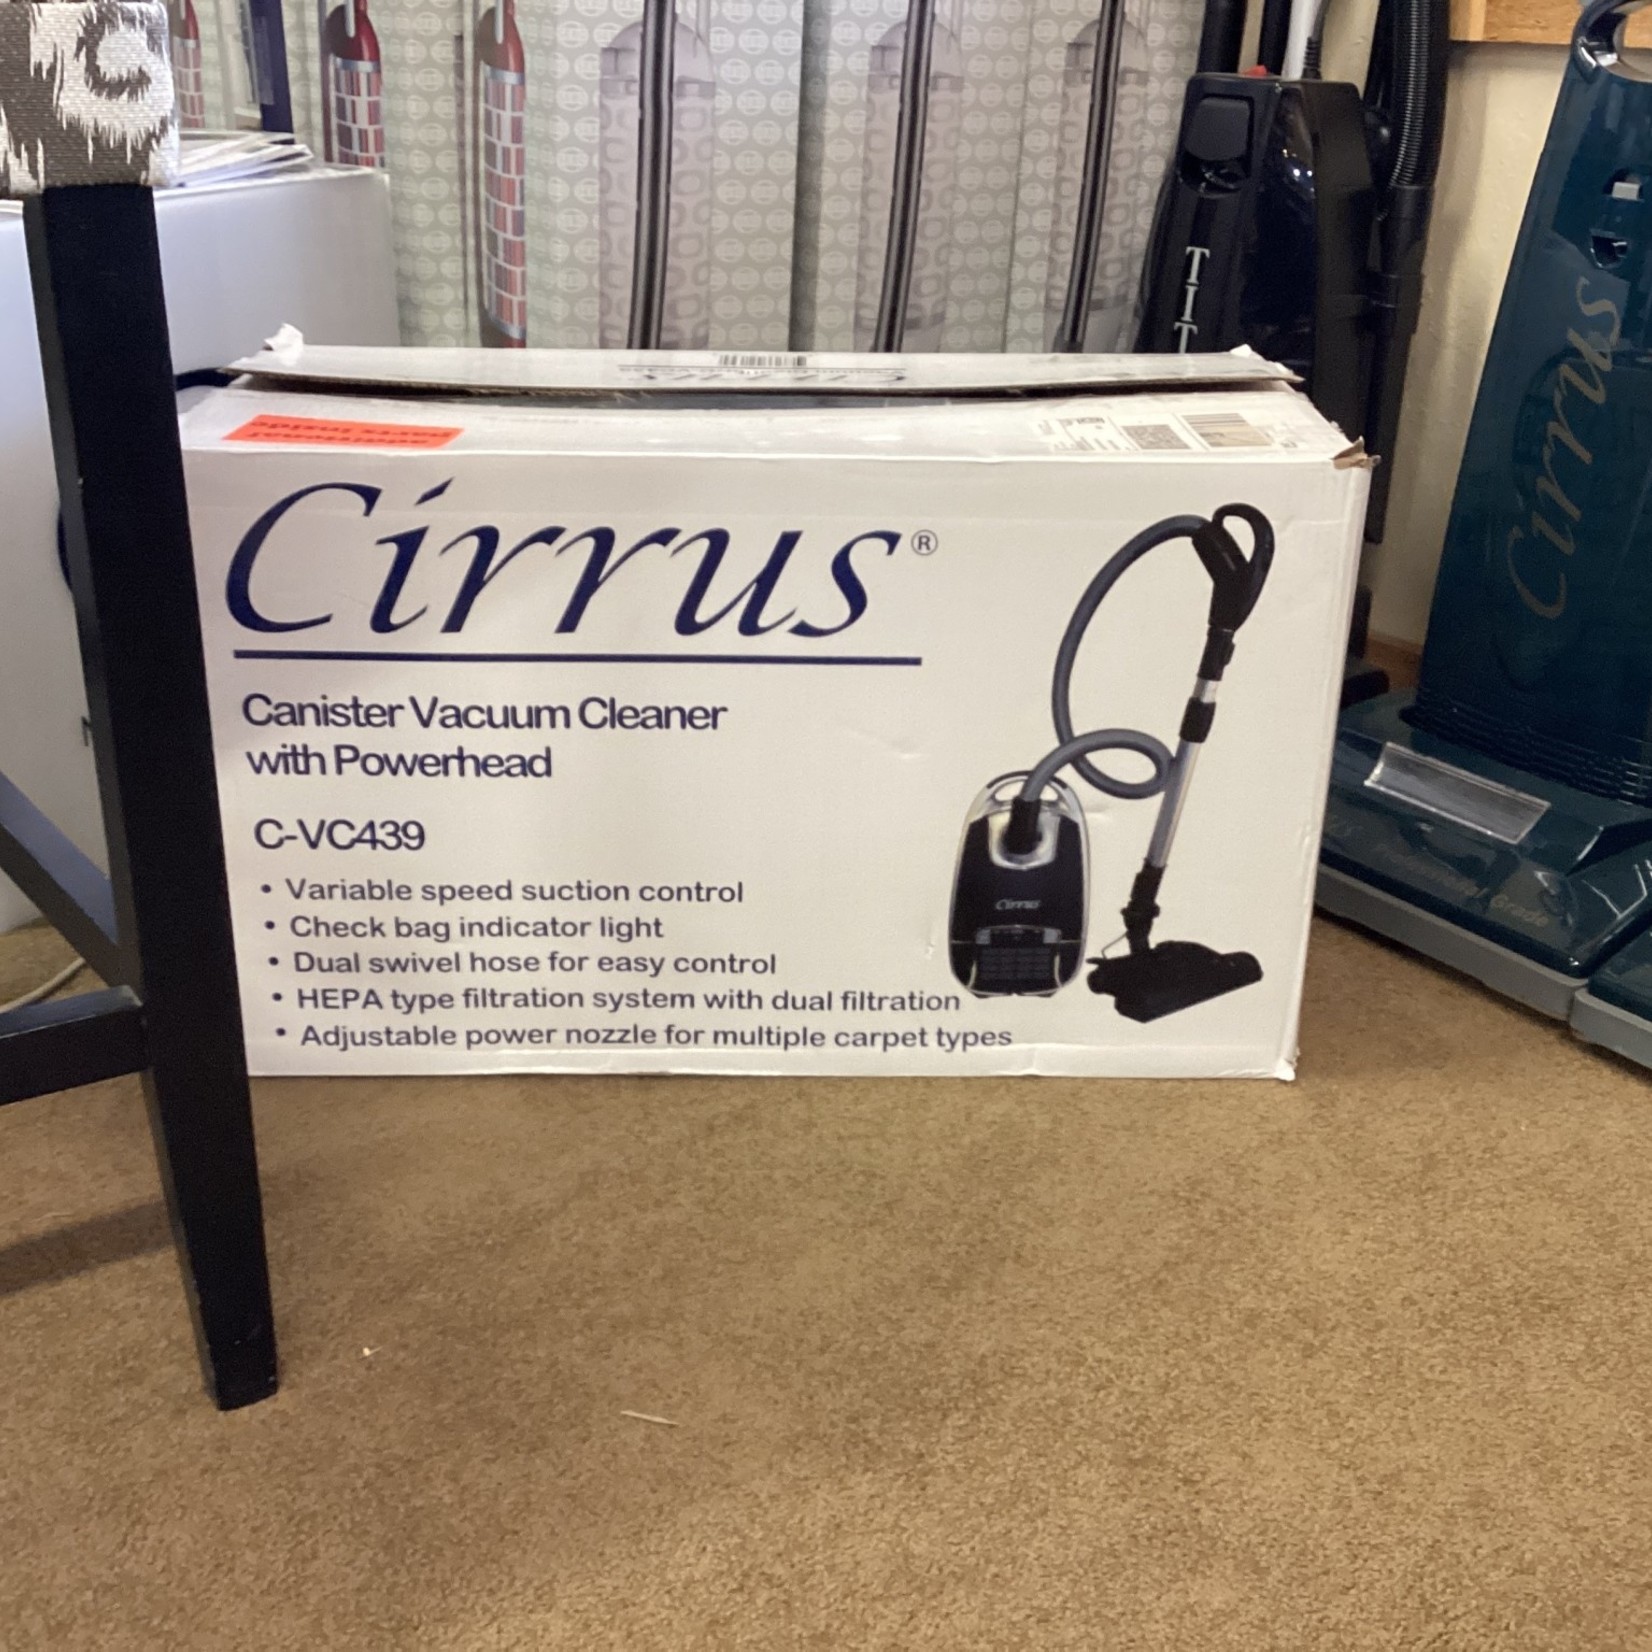 Cirrus Canister Vac VC439